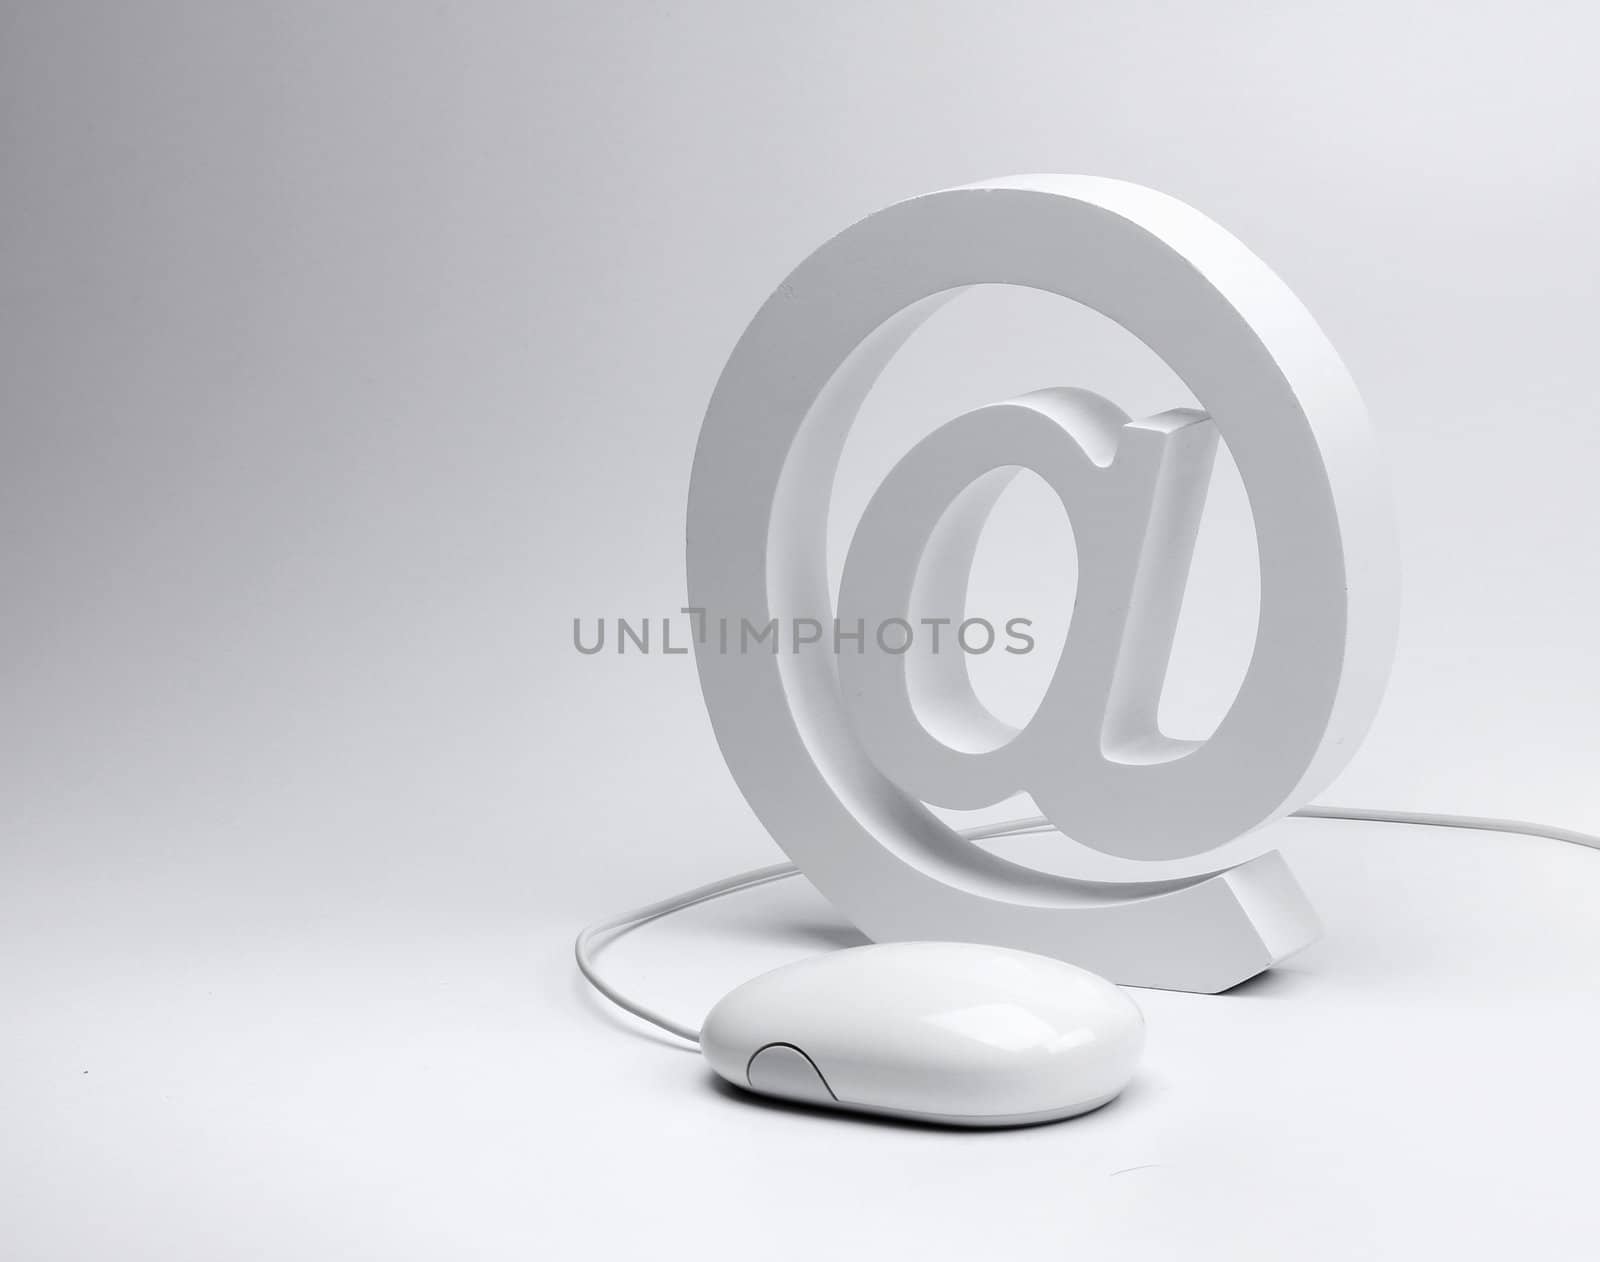 E-mail concept, @ sign email symbol and computer mouse